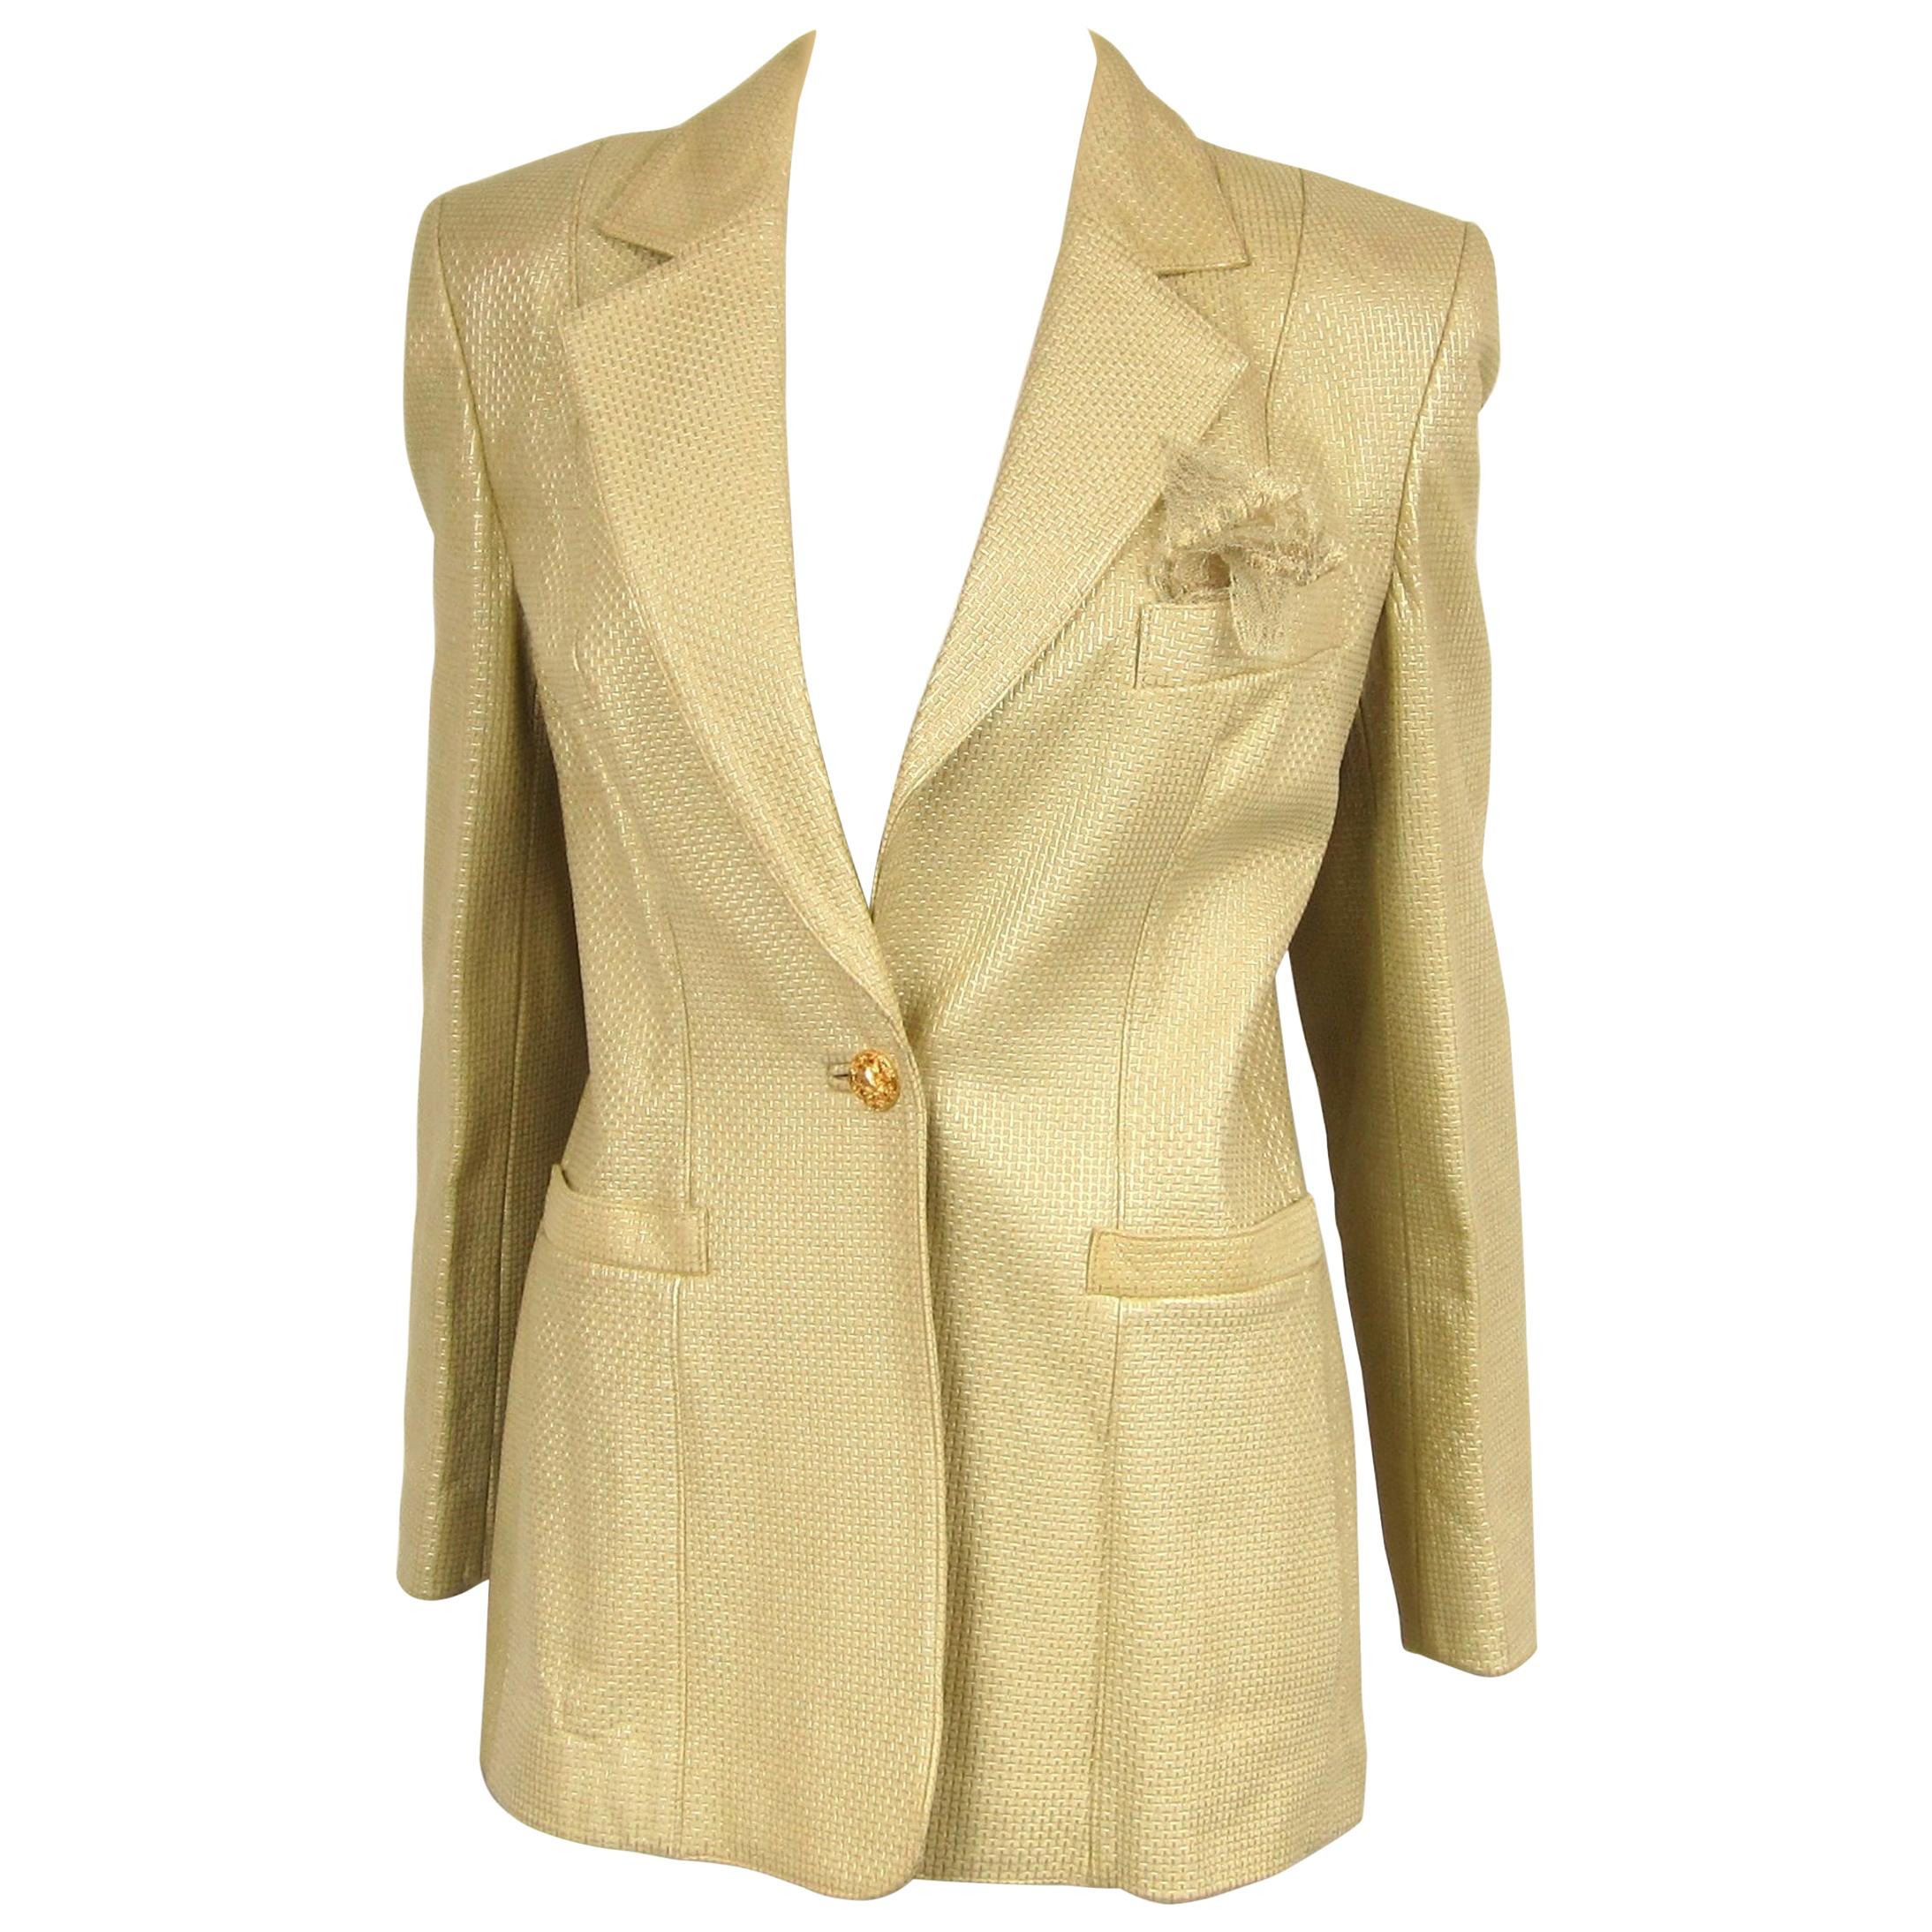 Escada Gold Leather 1990s Blazer Jacket New, Never Worn Price Tags Attached 